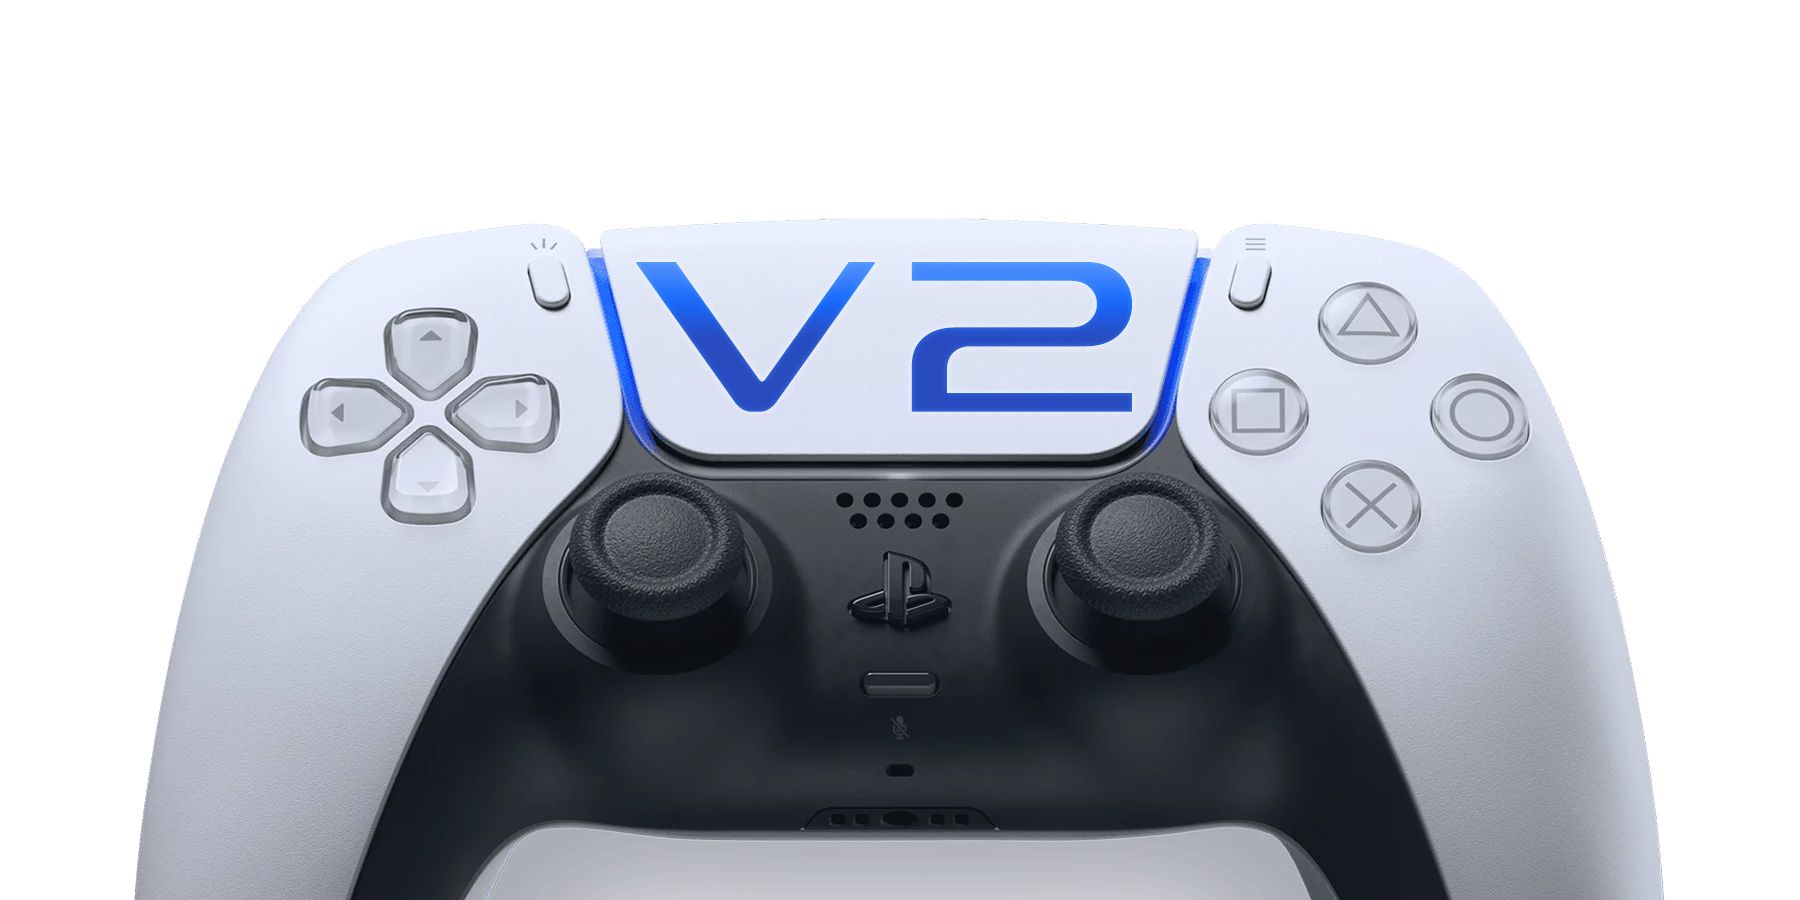 🅾️🔺️◻✖ on X: The DualSense V2 controller for PS5